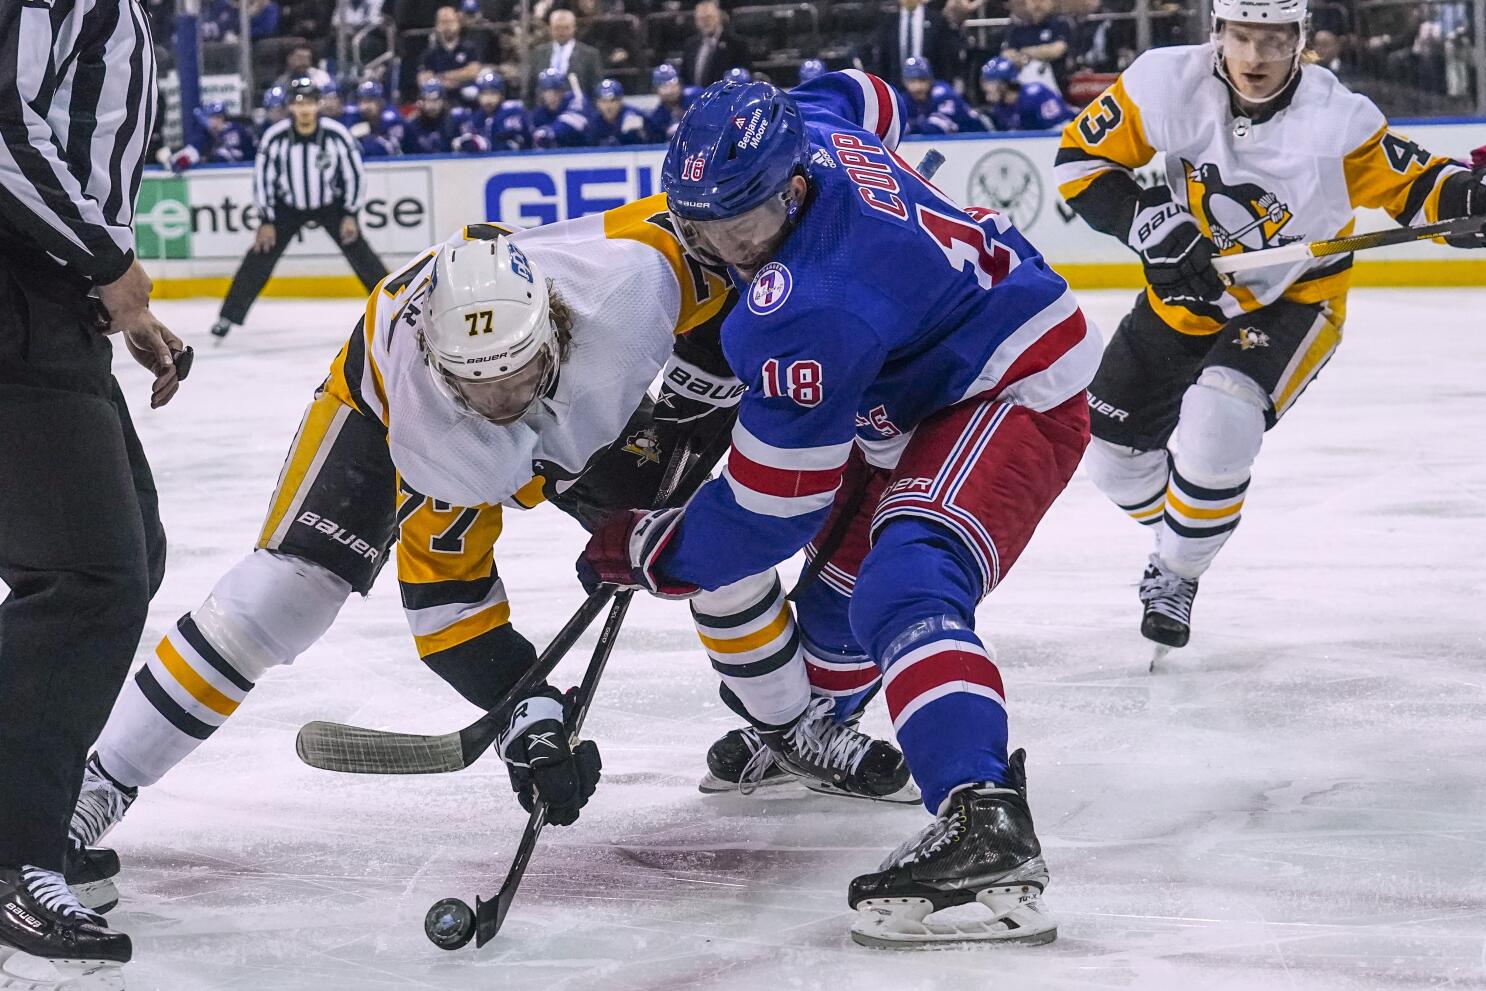 Rangers Host Penguins for the First of Two-Straight Meetings